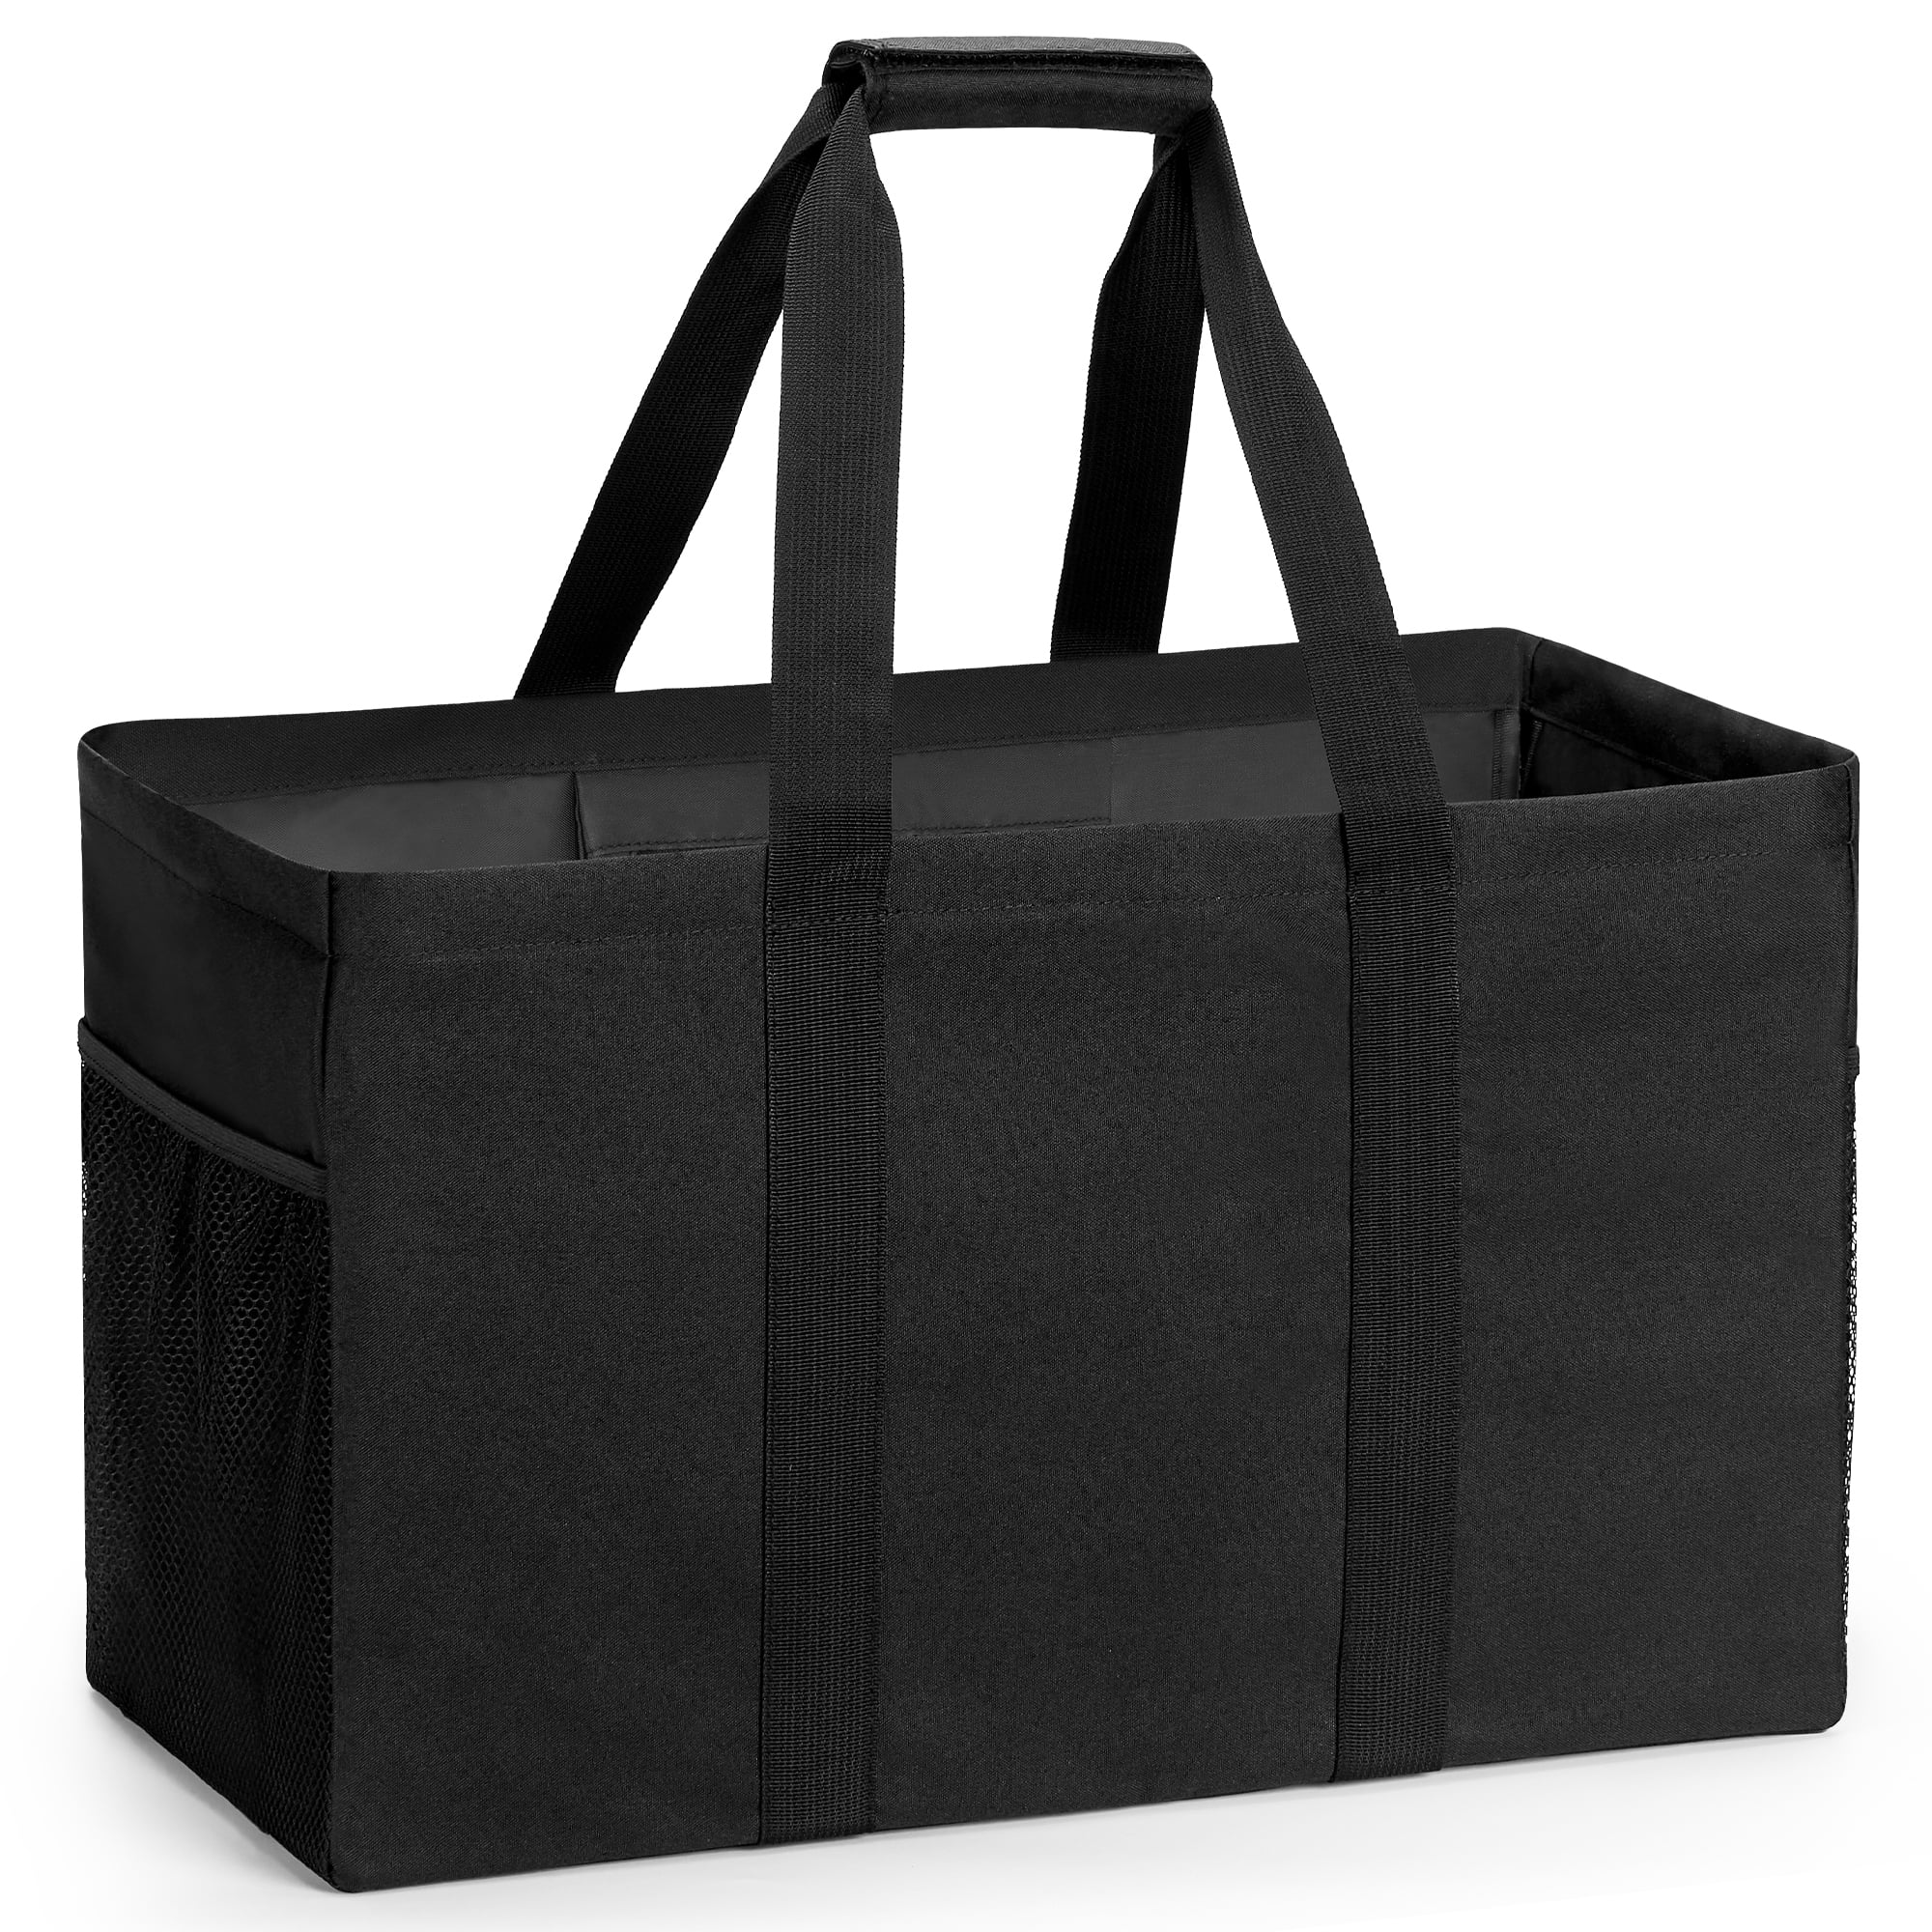 Shopping Bag Foldable Eco-friendly Oxford Cloth Reusable Small Size Tote  Bag for Home